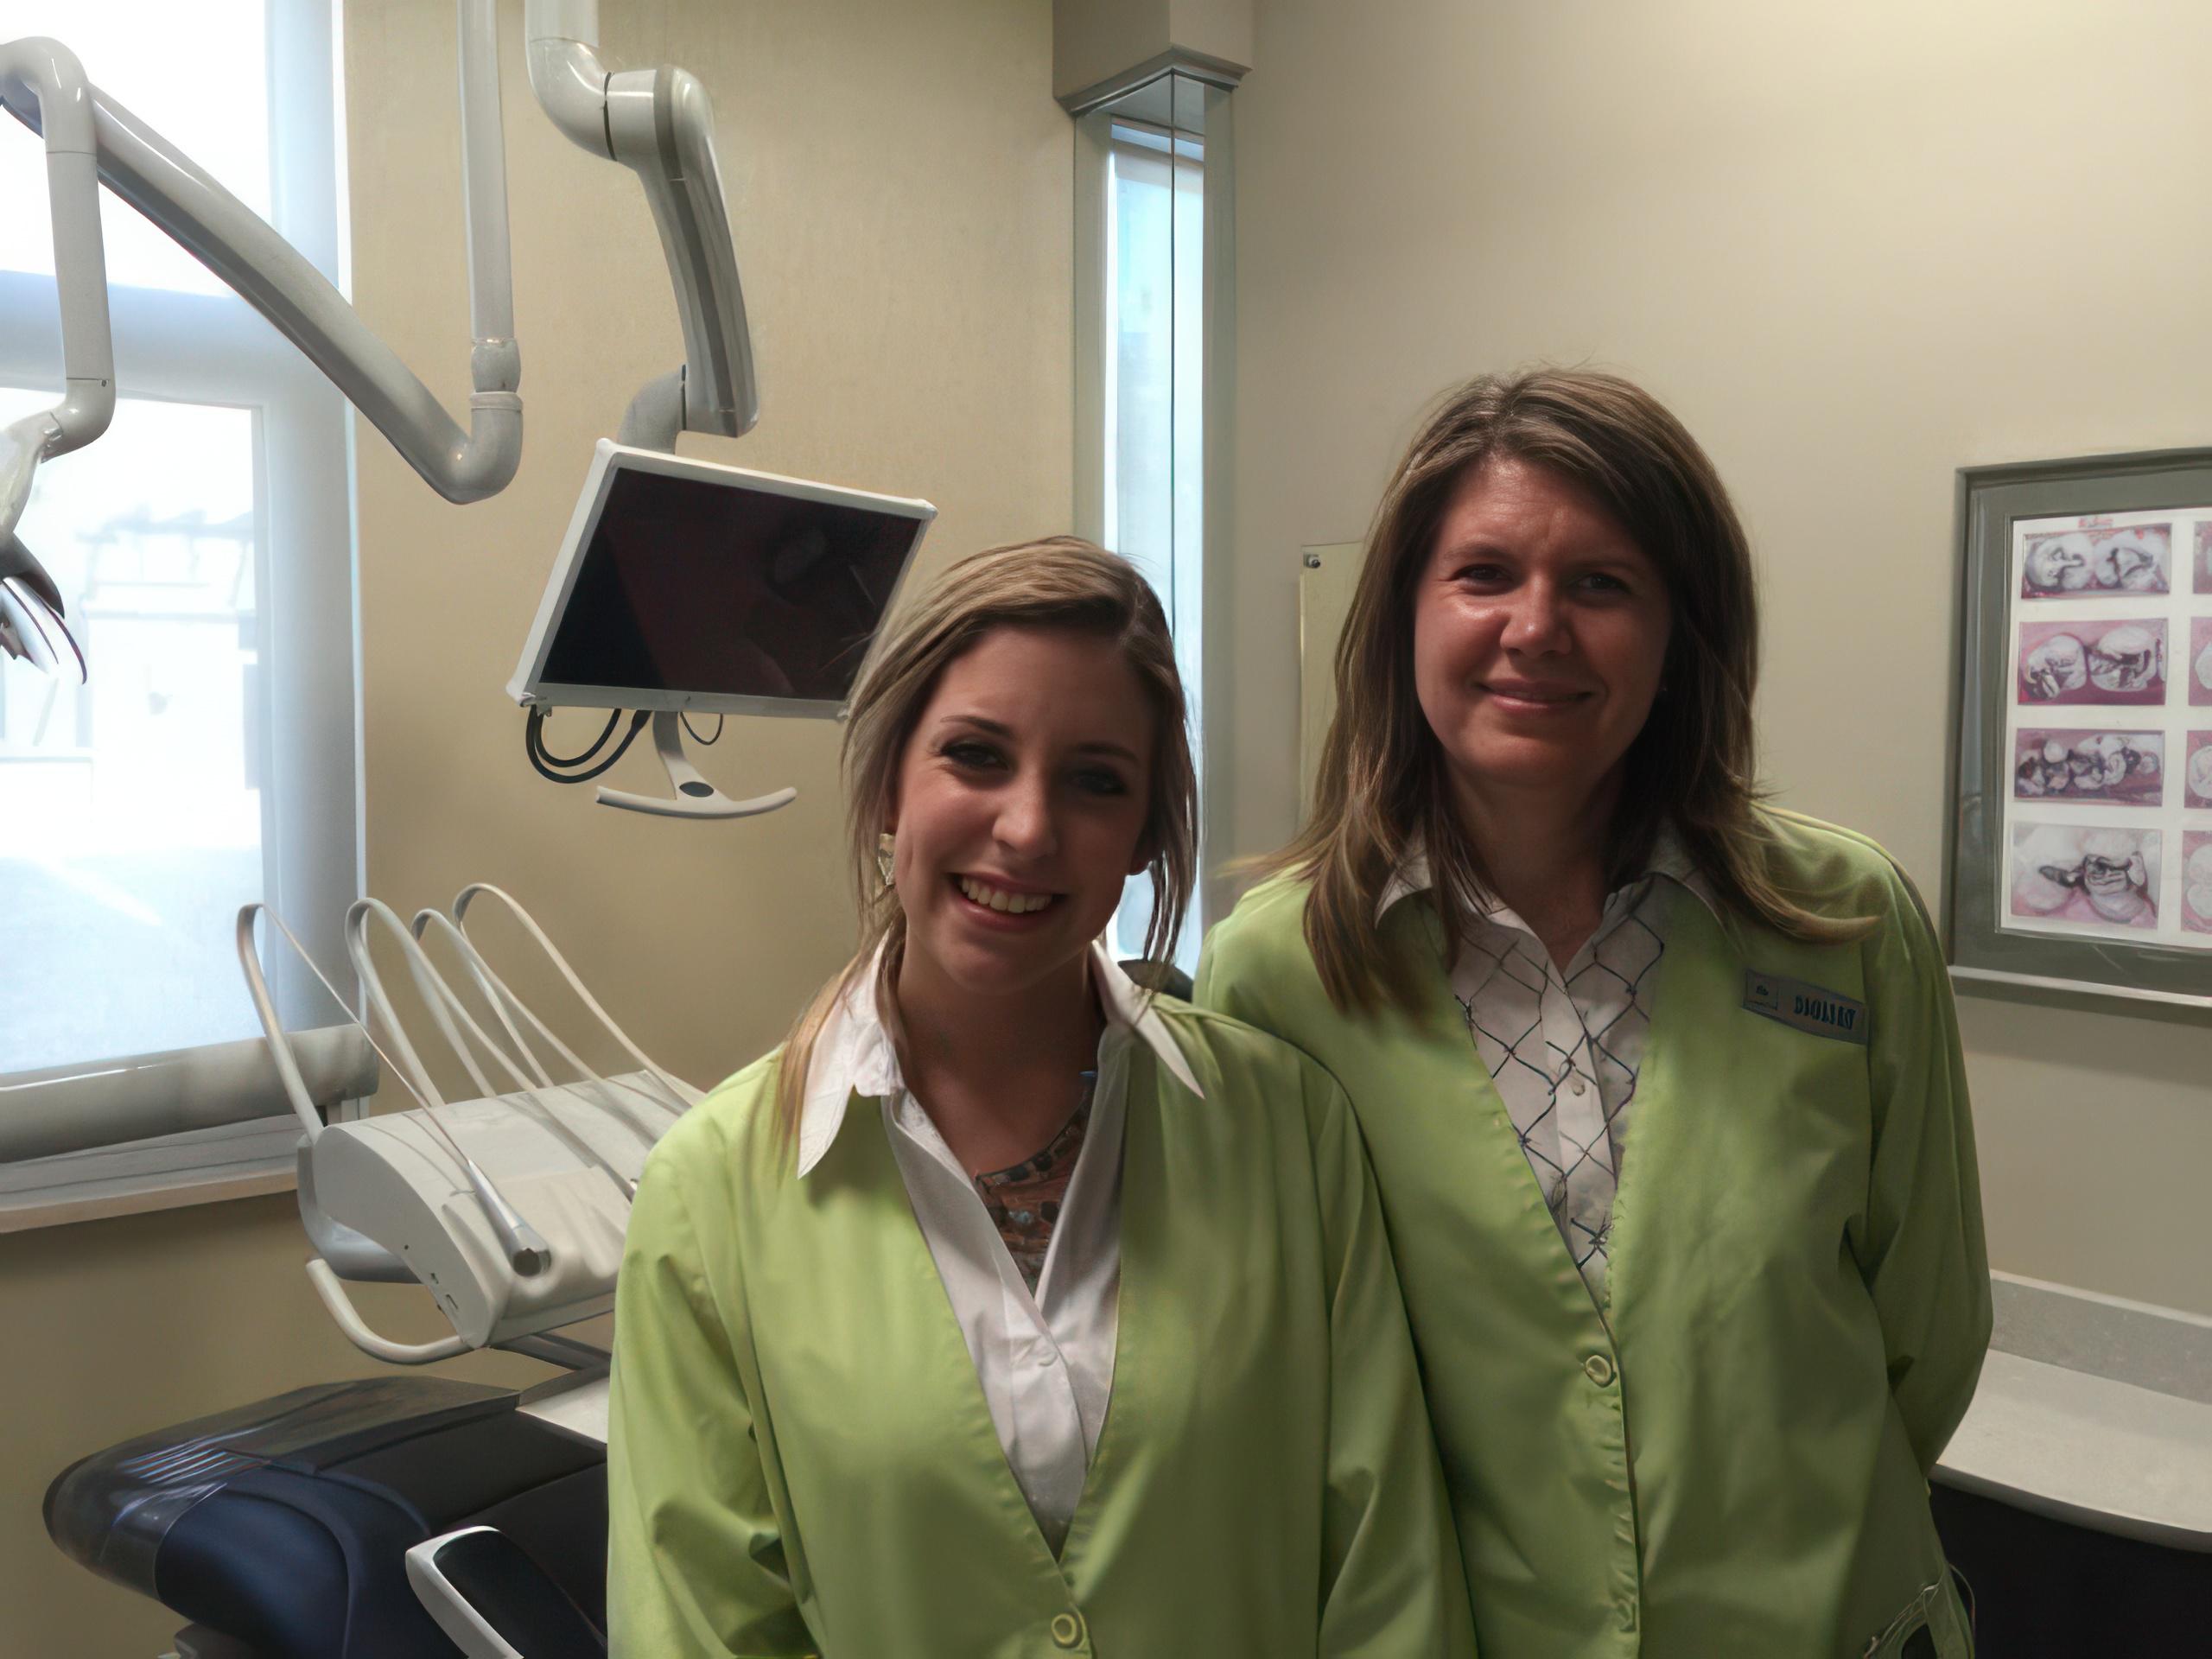 Staff of LoPour & Associates DDS Smiles by Design Family & Cosmetic Dentistry | Albuquerque, NM